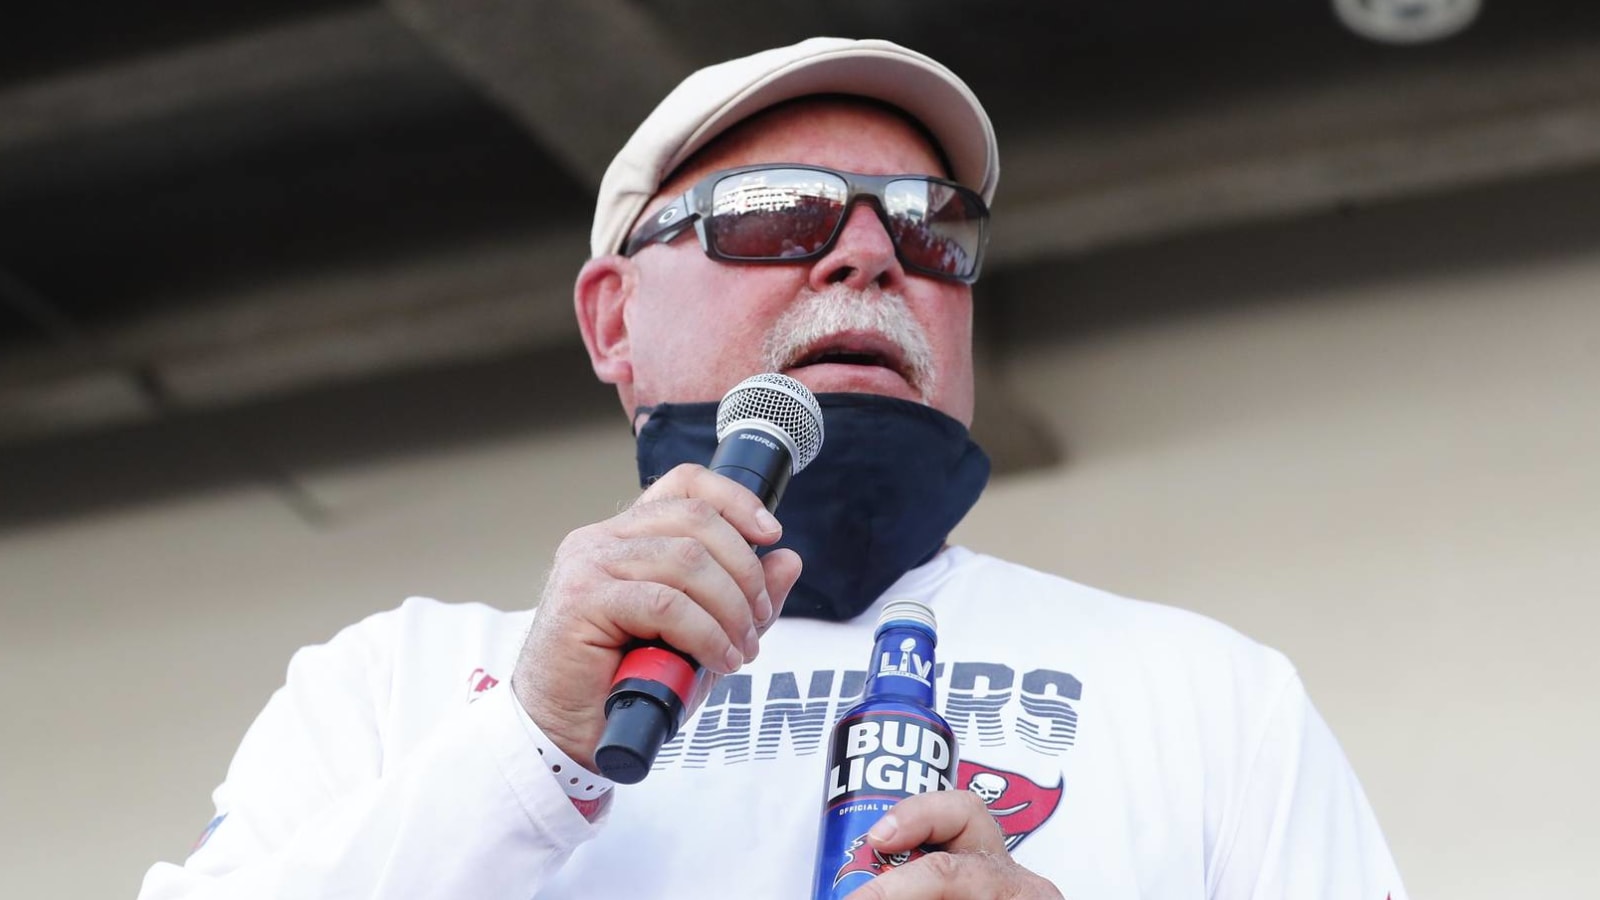 Arians: 'I've never said anything bad about Bill Belichick'